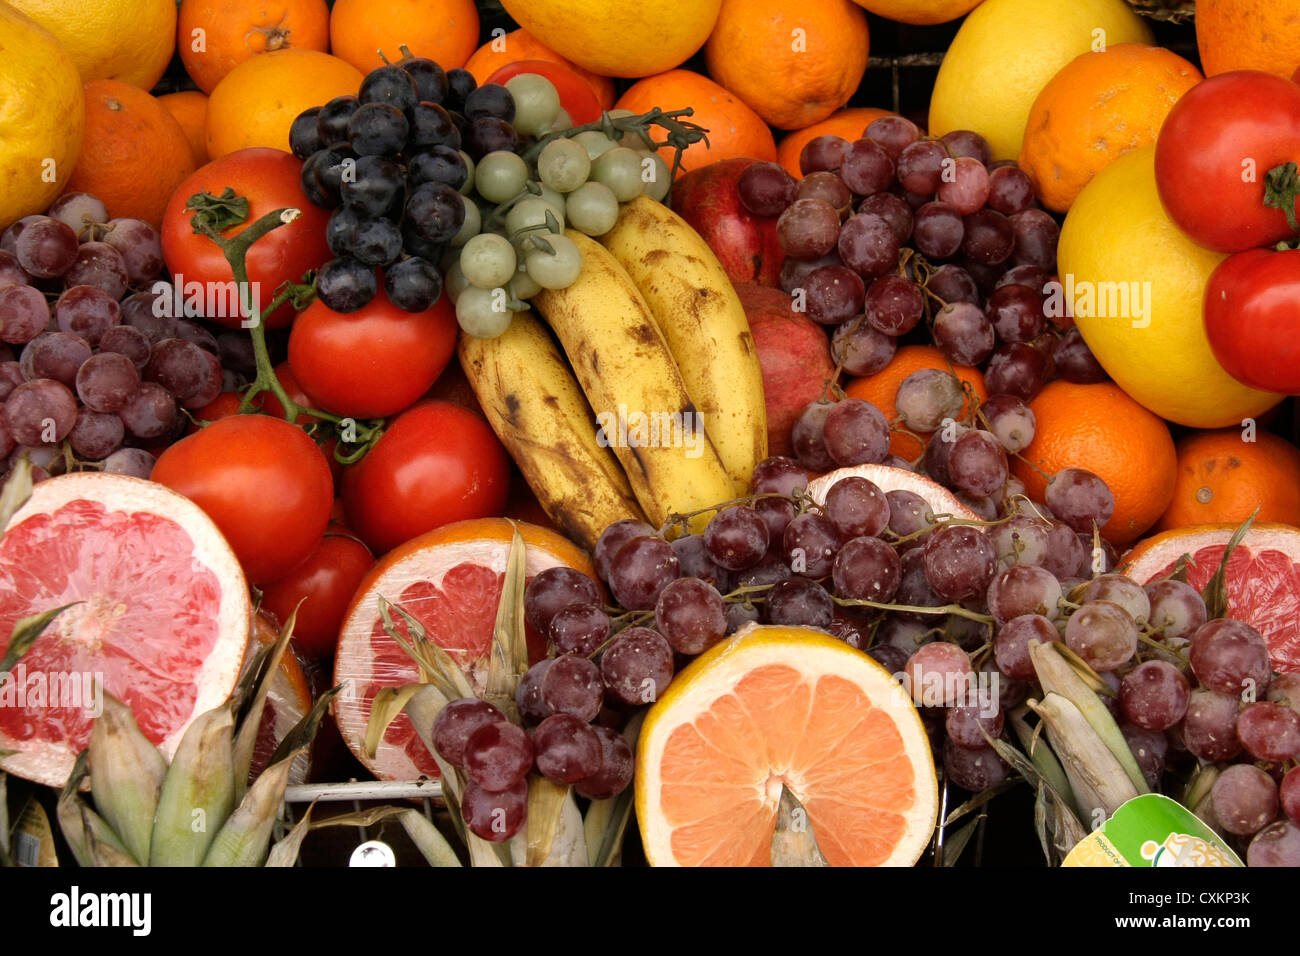 different types of fruits and vegetables displayed for sale in a basket Stock Photo